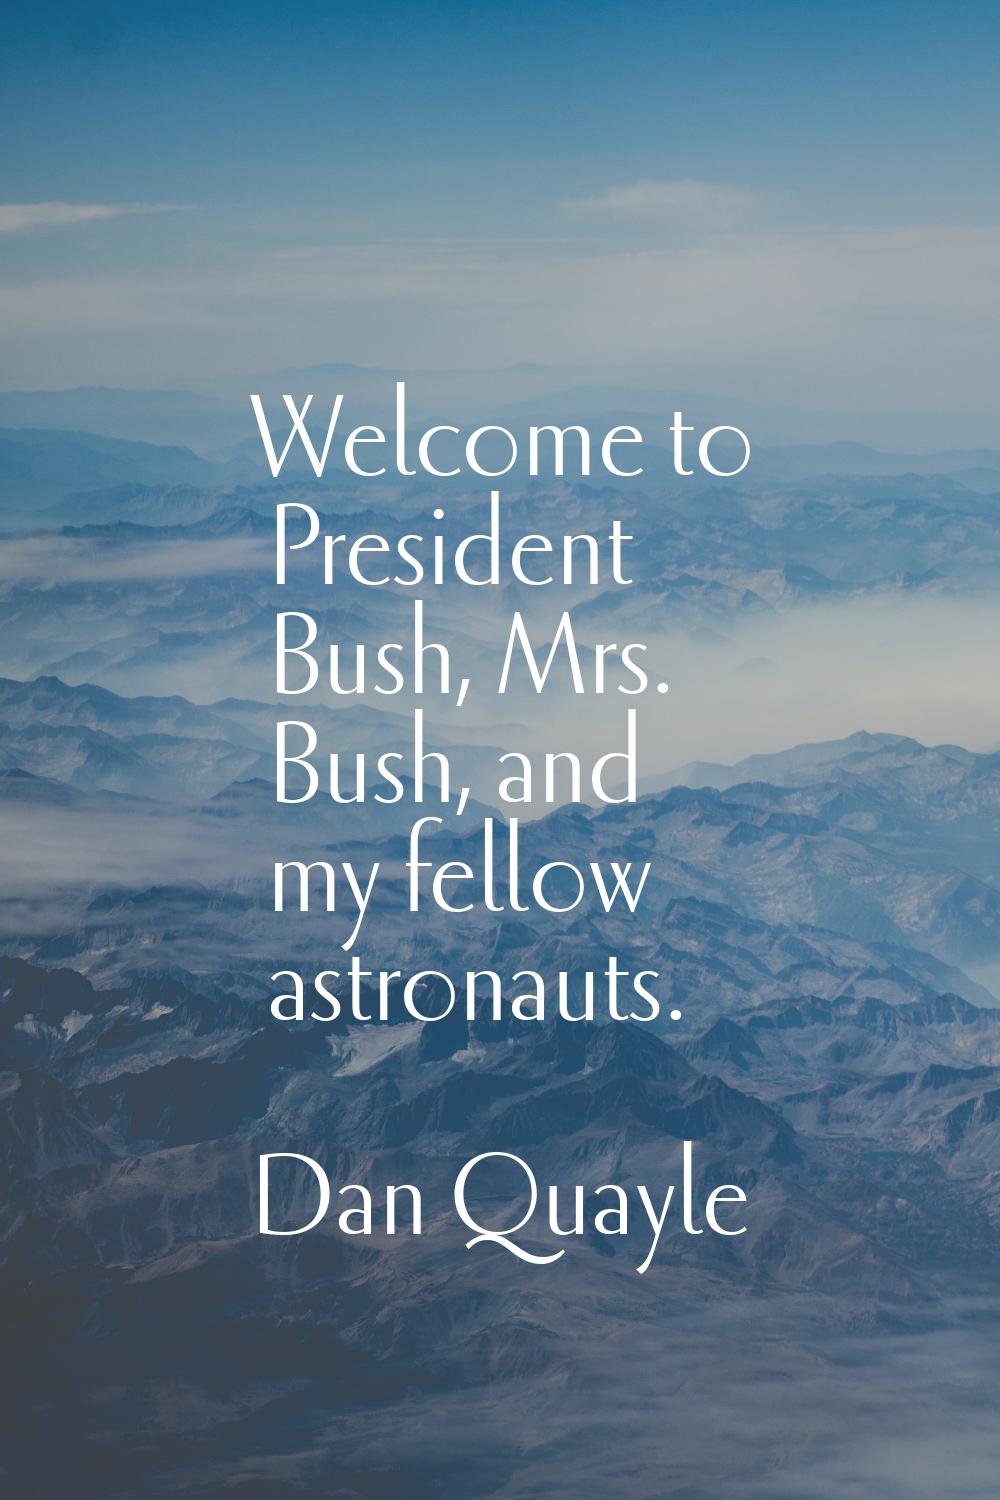 Welcome to President Bush, Mrs. Bush, and my fellow astronauts.